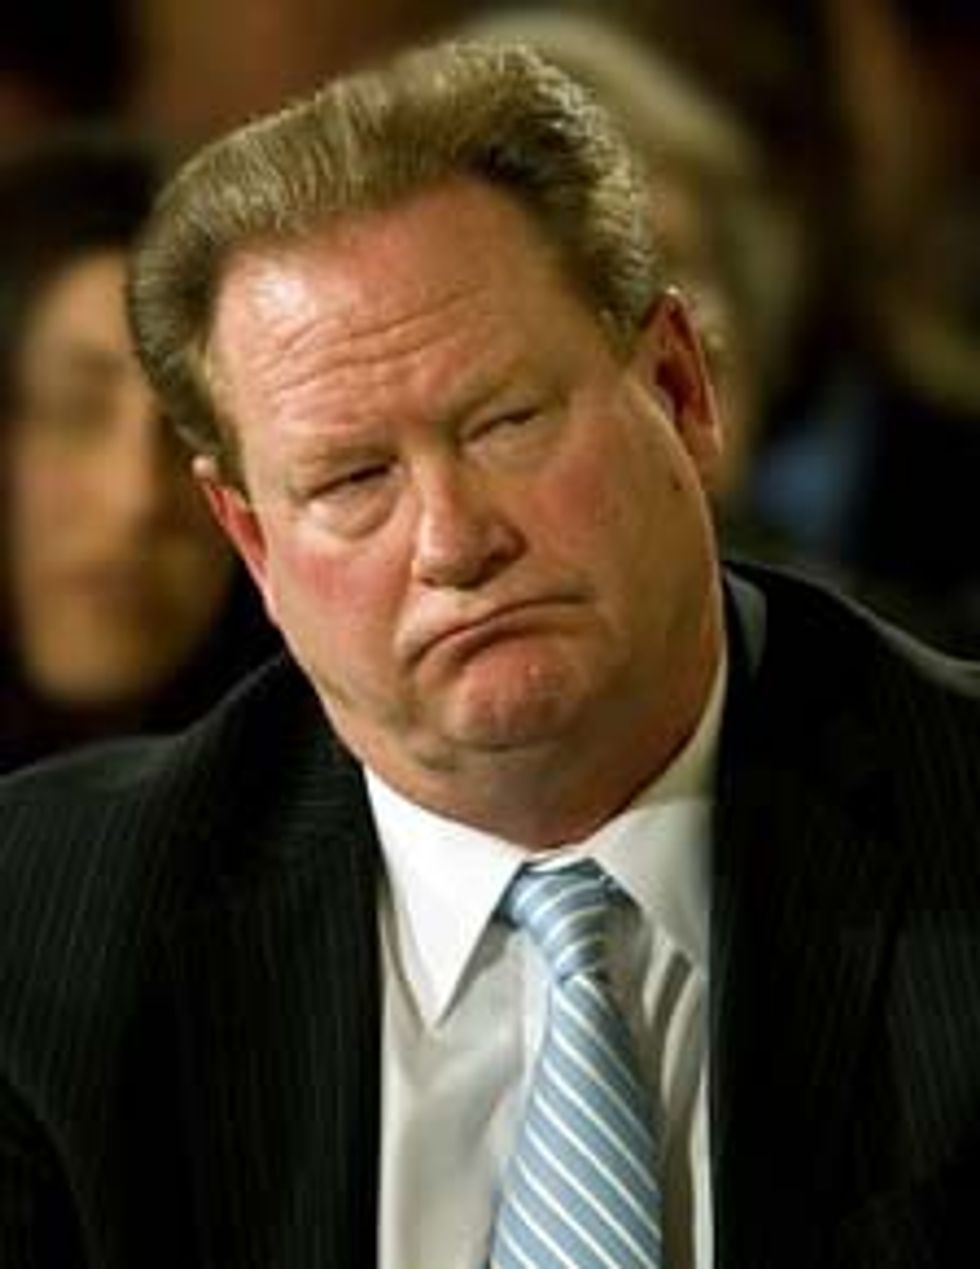 Crybaby Whineocerous Ed Schultz Wants His Own Glenn Beck Picnic